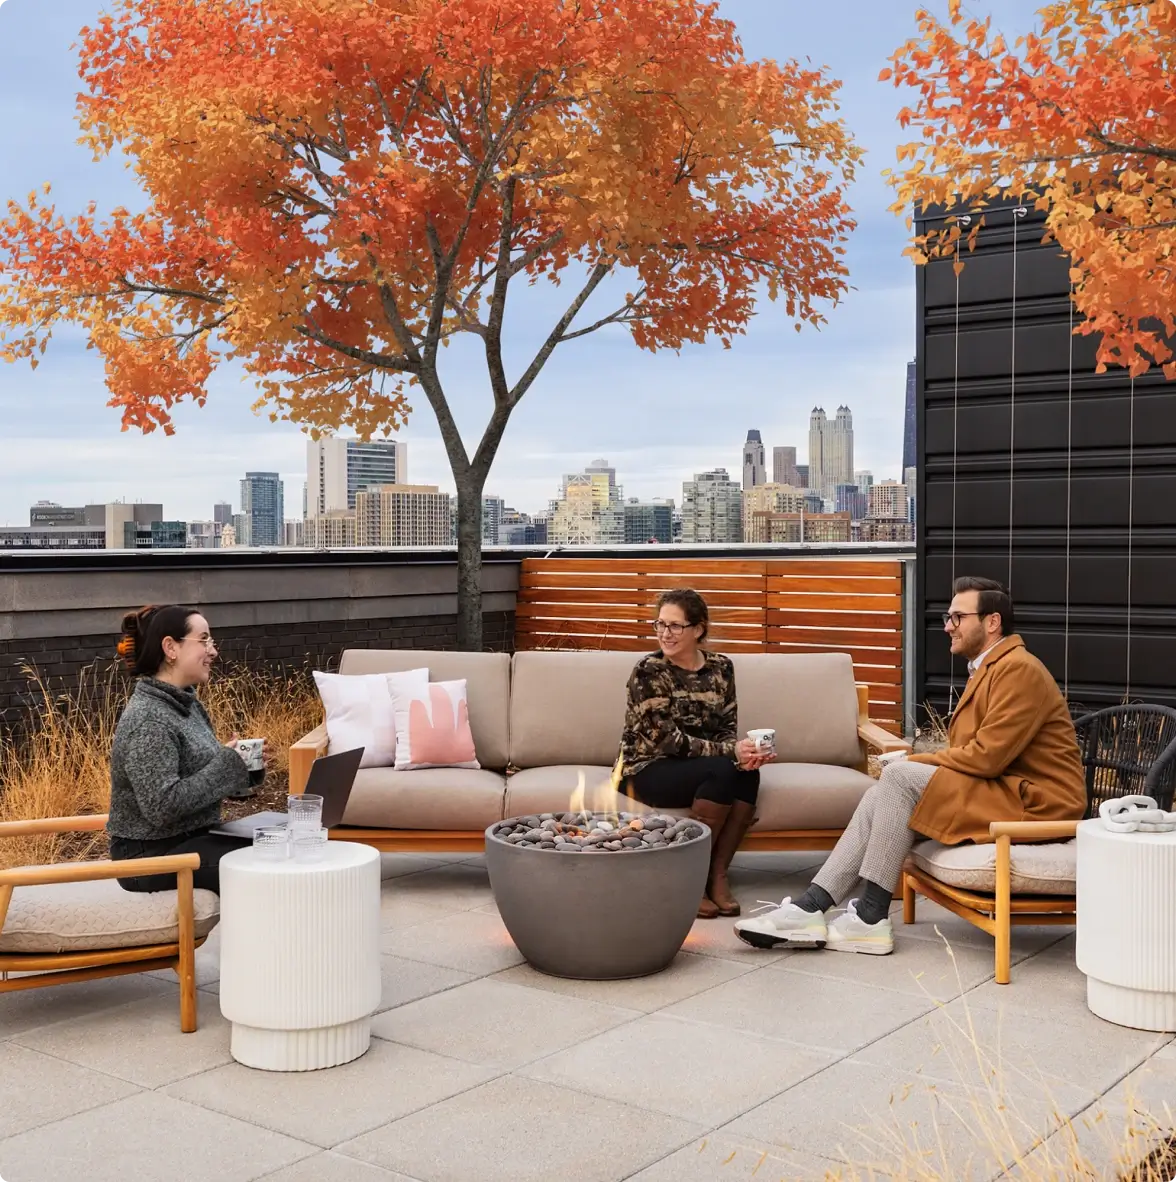 Rooftop patio outdoors at office headquarters